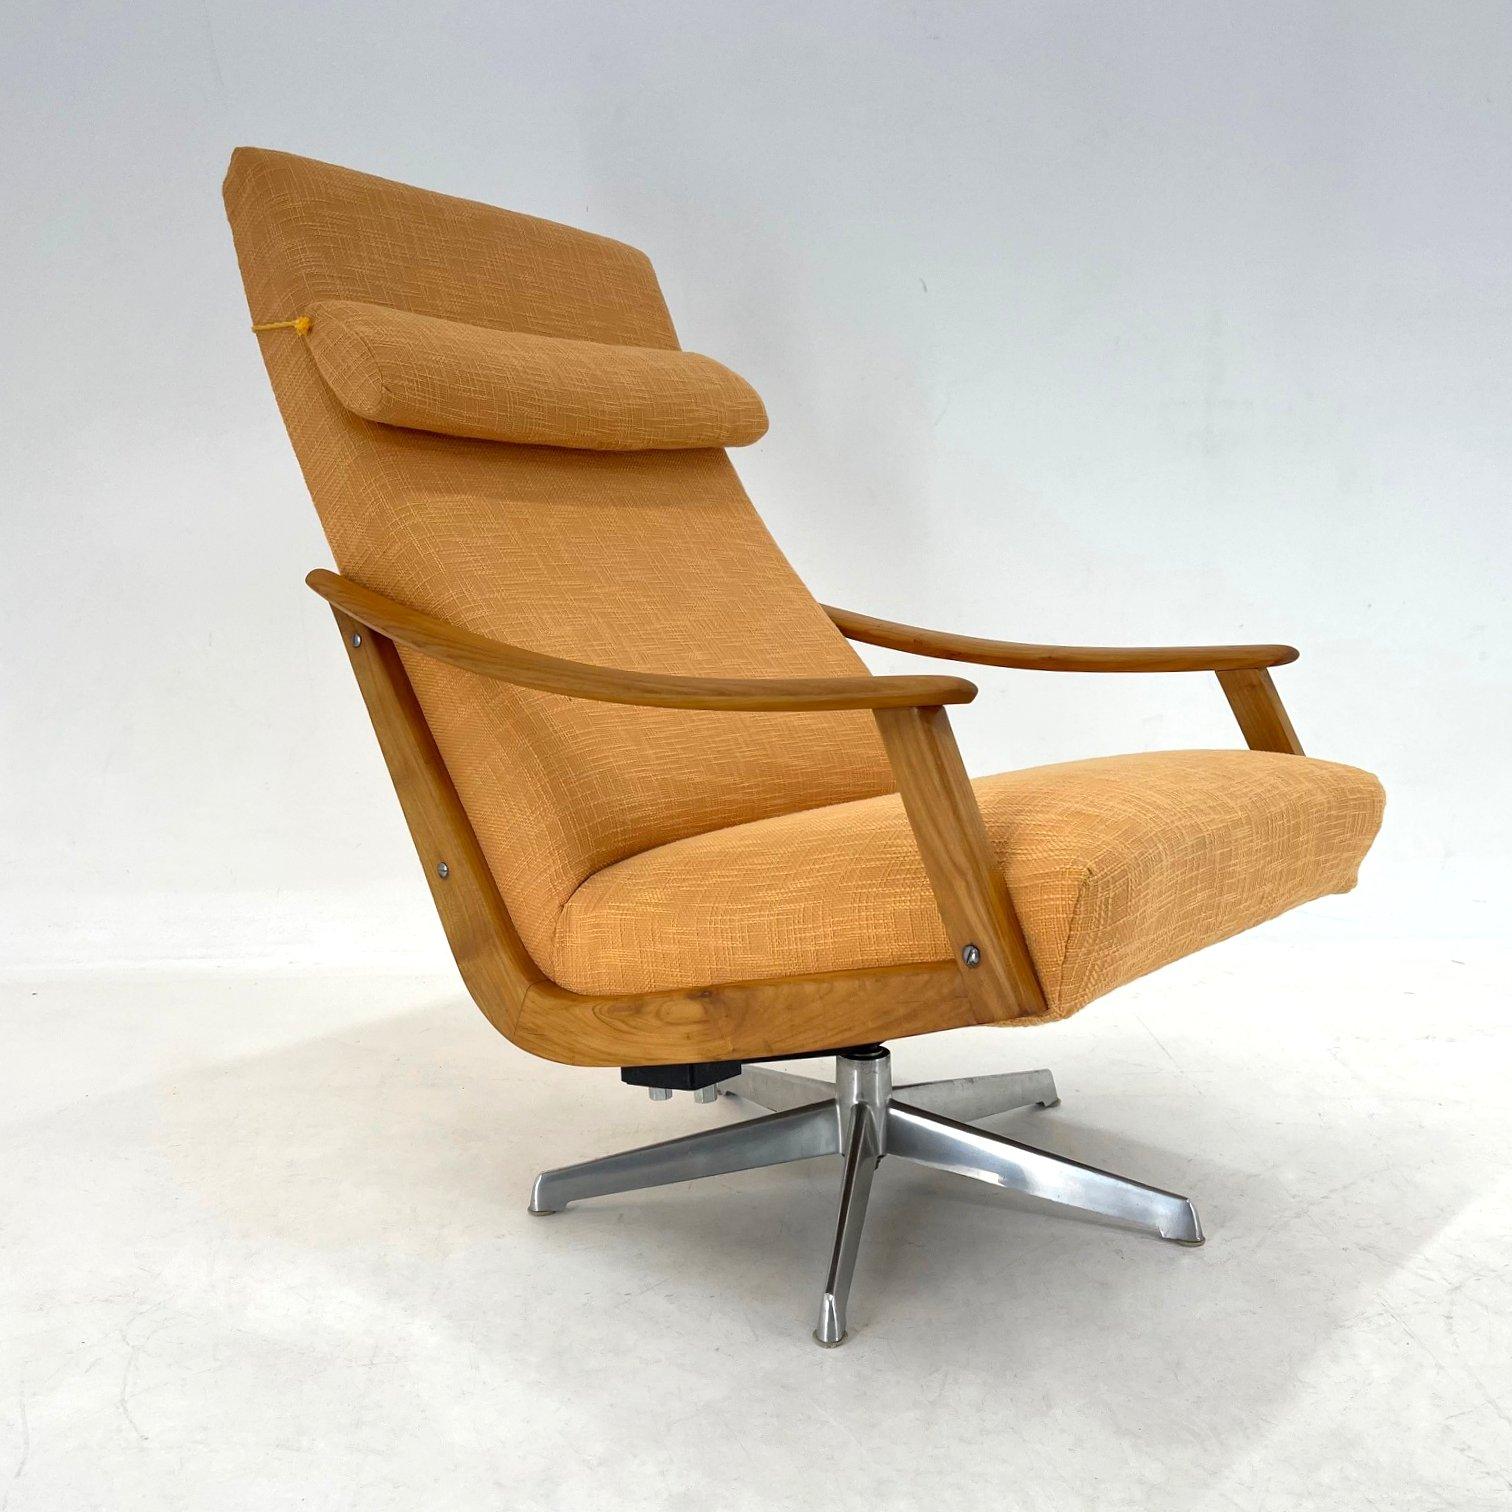 Beautiful rare, rotating armchair designed by Adolf Wrenger and produced by his company in the 1950's. The upholstery is original, in very good condition. Wooden parts were carefuly refurbished.